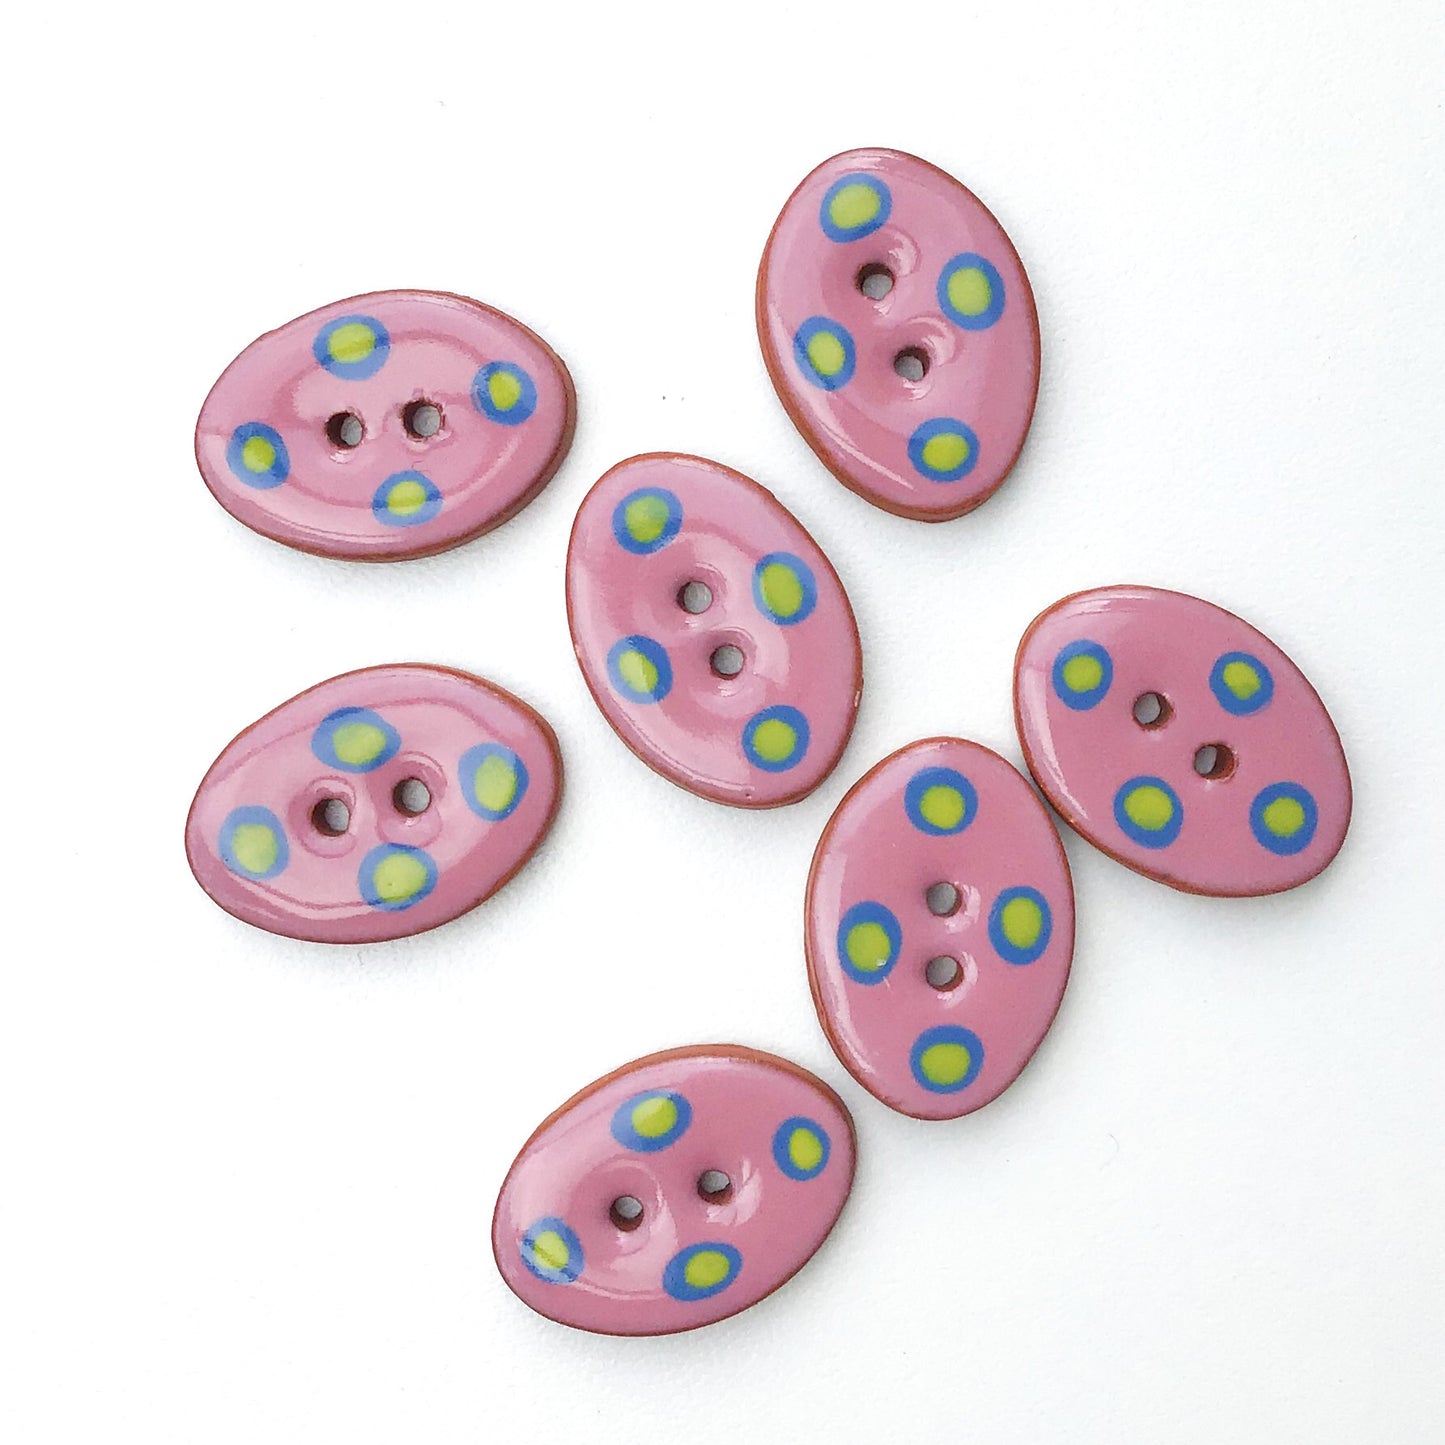 Oval Ceramic Buttons  - Hand Painted Clay Buttons with Dots - Pink - Chartreuse - Blue - 5/8" x 7/8" - 7 Pack